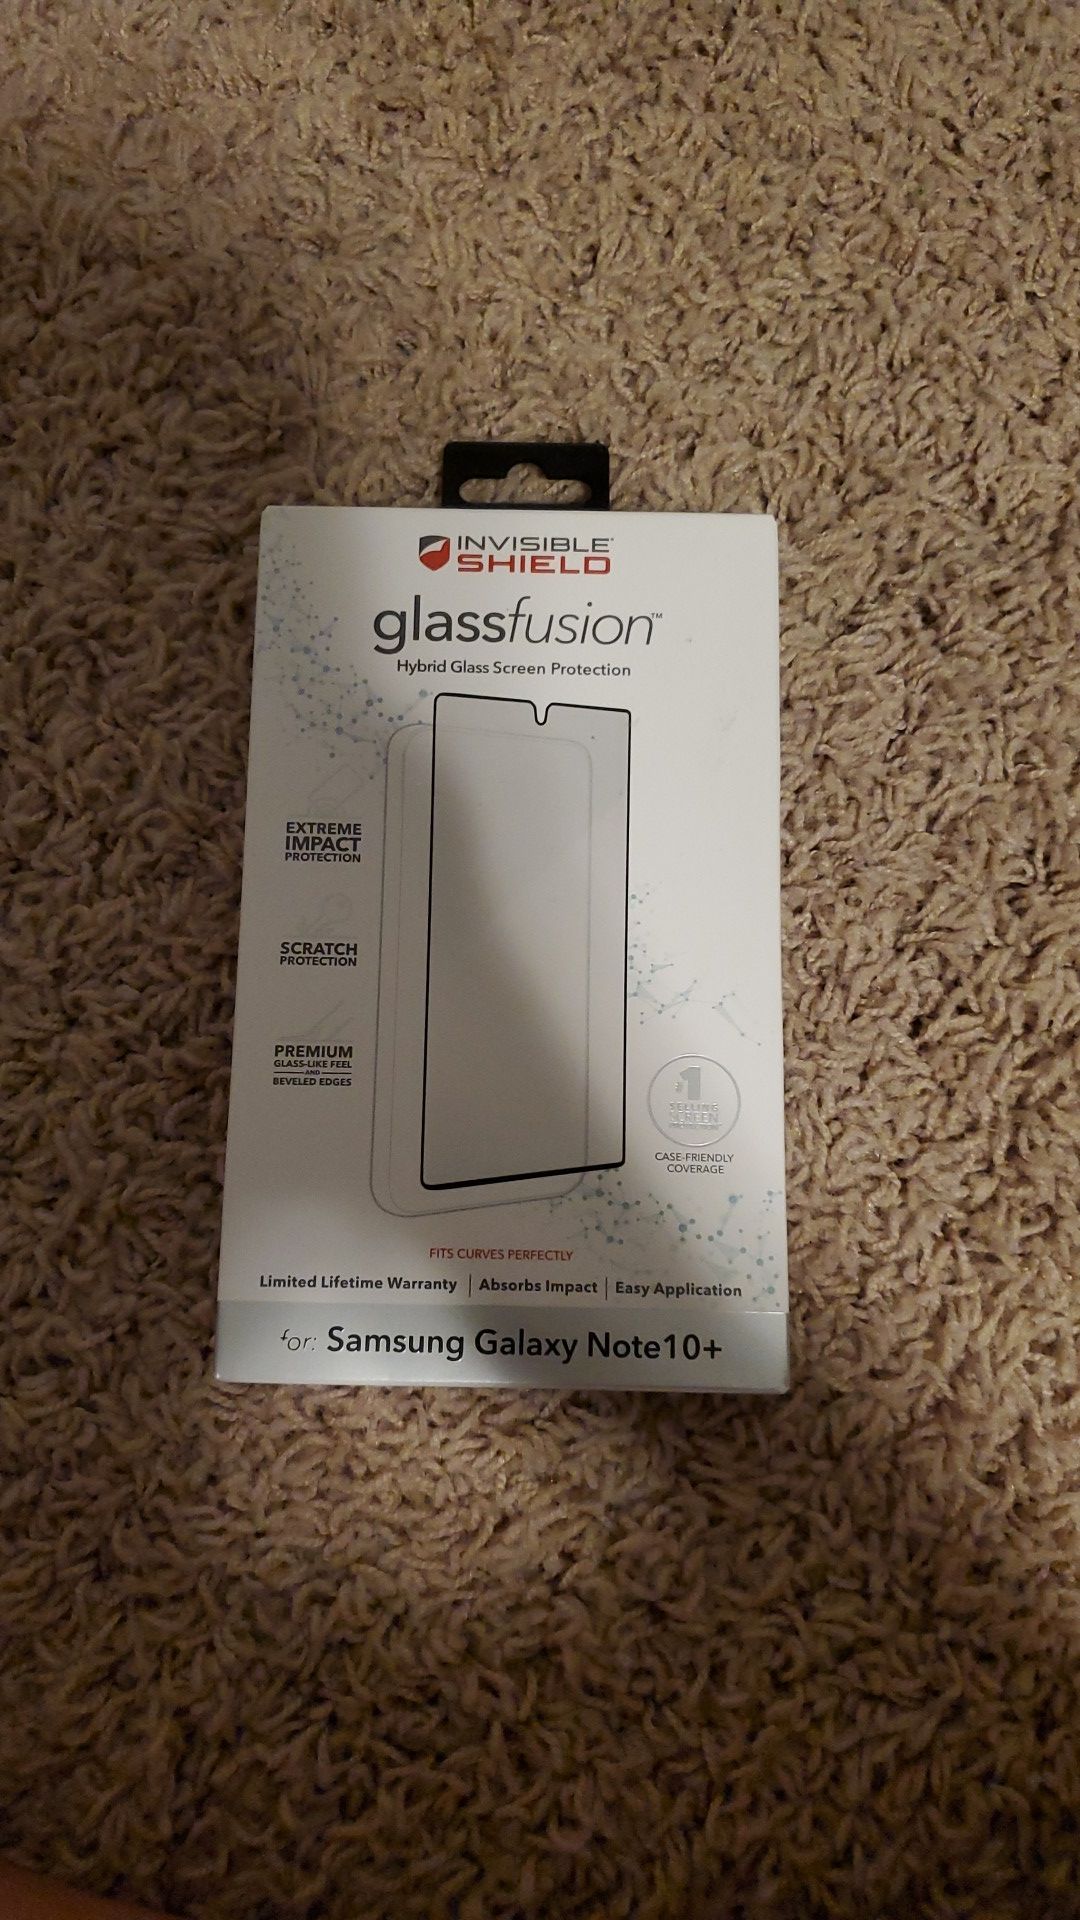 Invisible shield for samsung Galaxy Note 10+